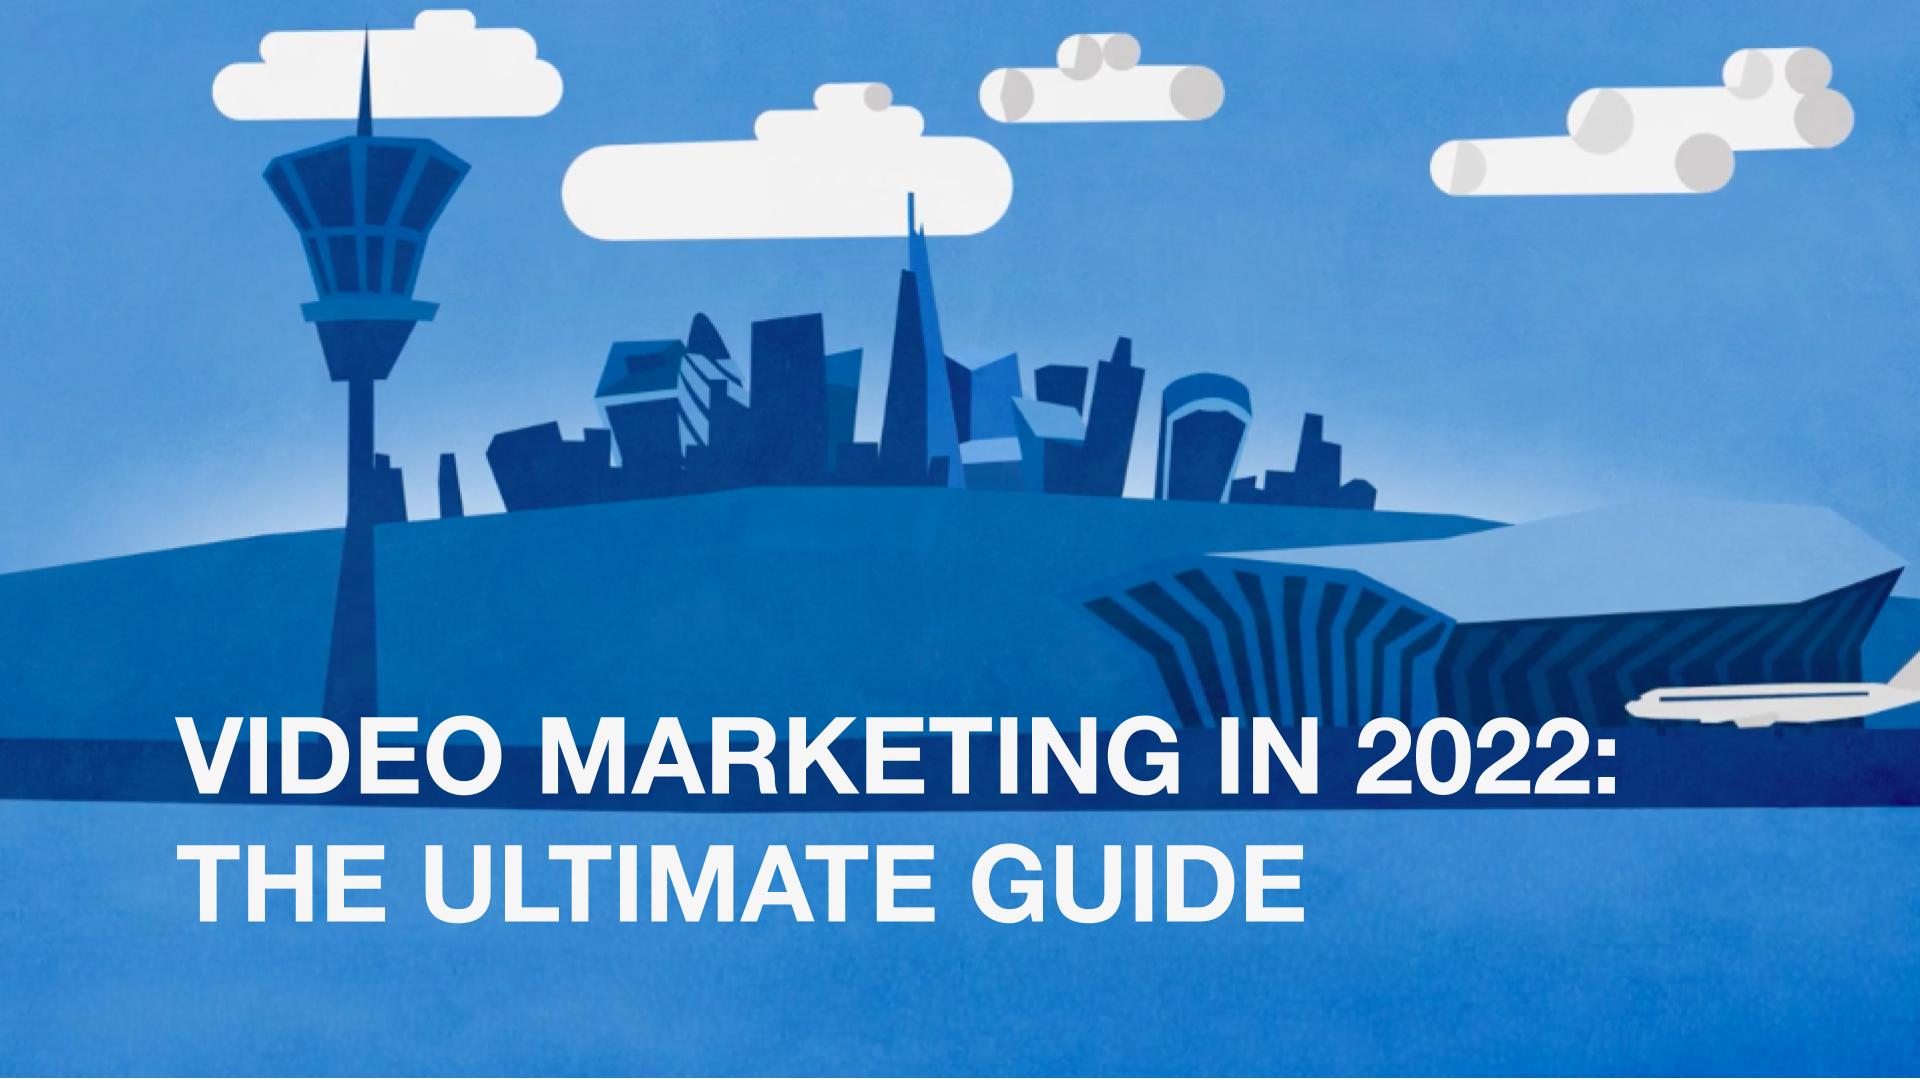 VIDEO MARKETING IN 2022: THE ULTIMATE GUIDE